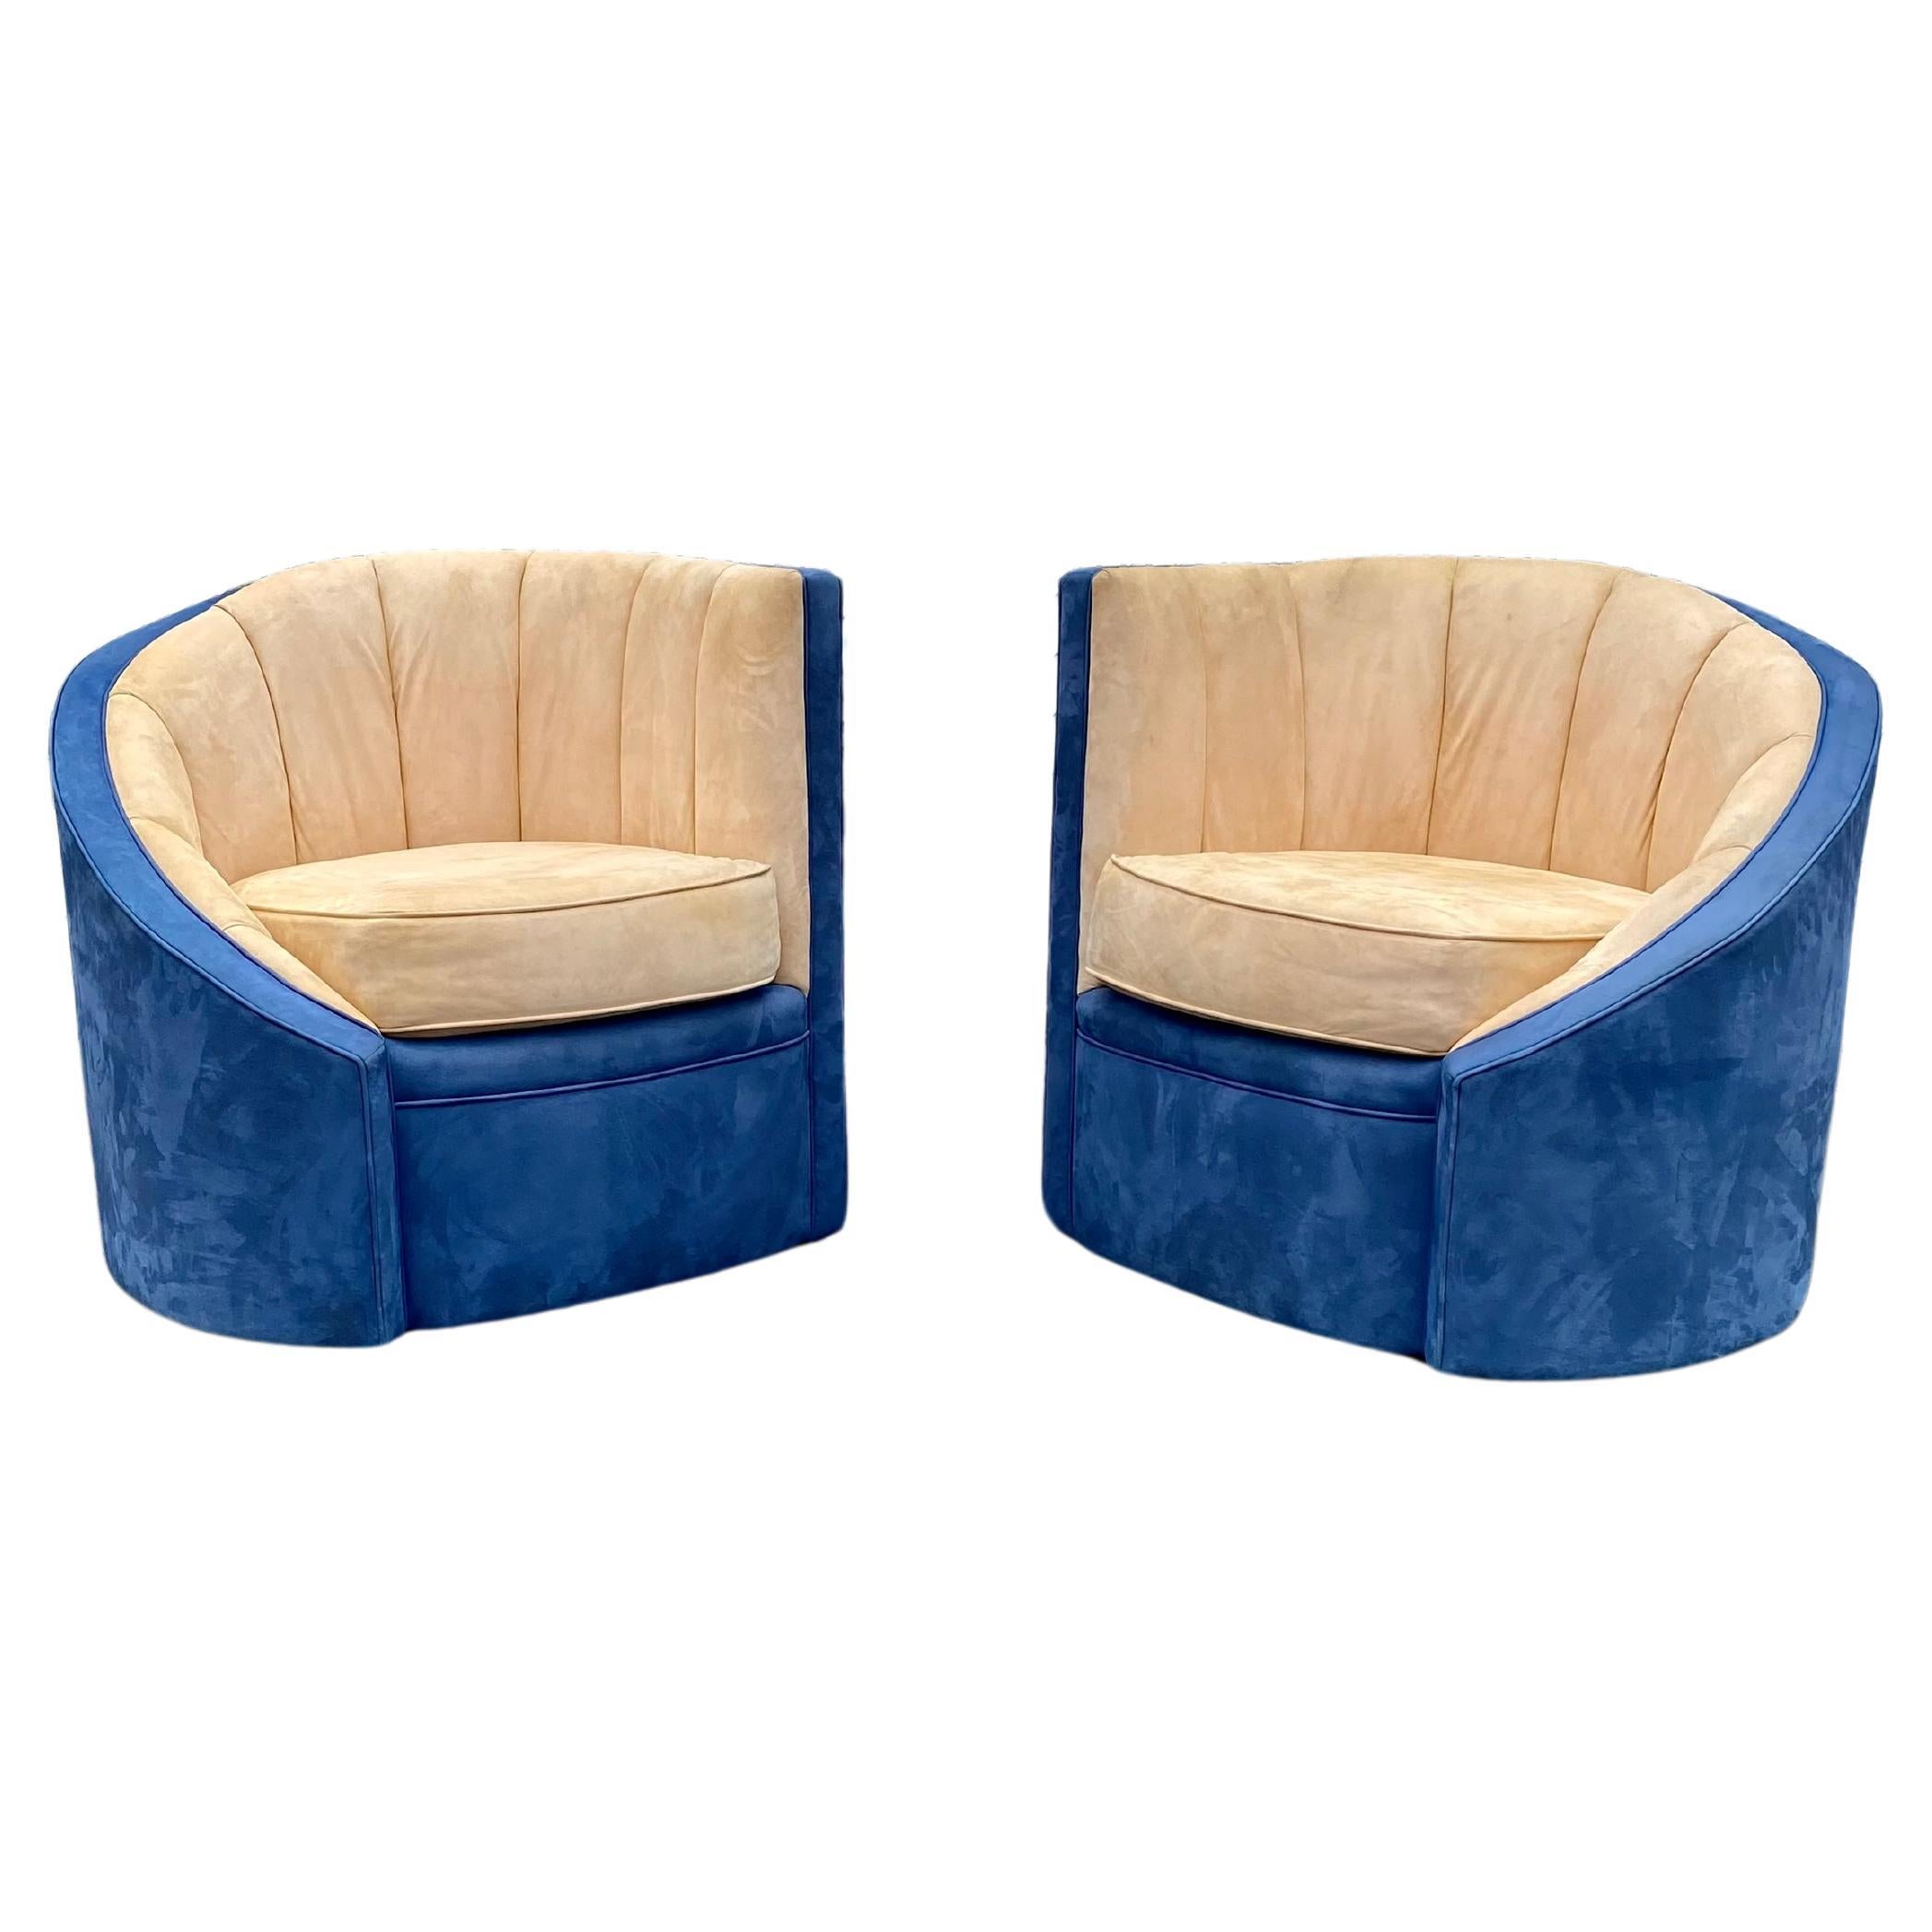 1990s Weiman Asymmetrical Channeled Barrel Chairs, Set of 2 For Sale